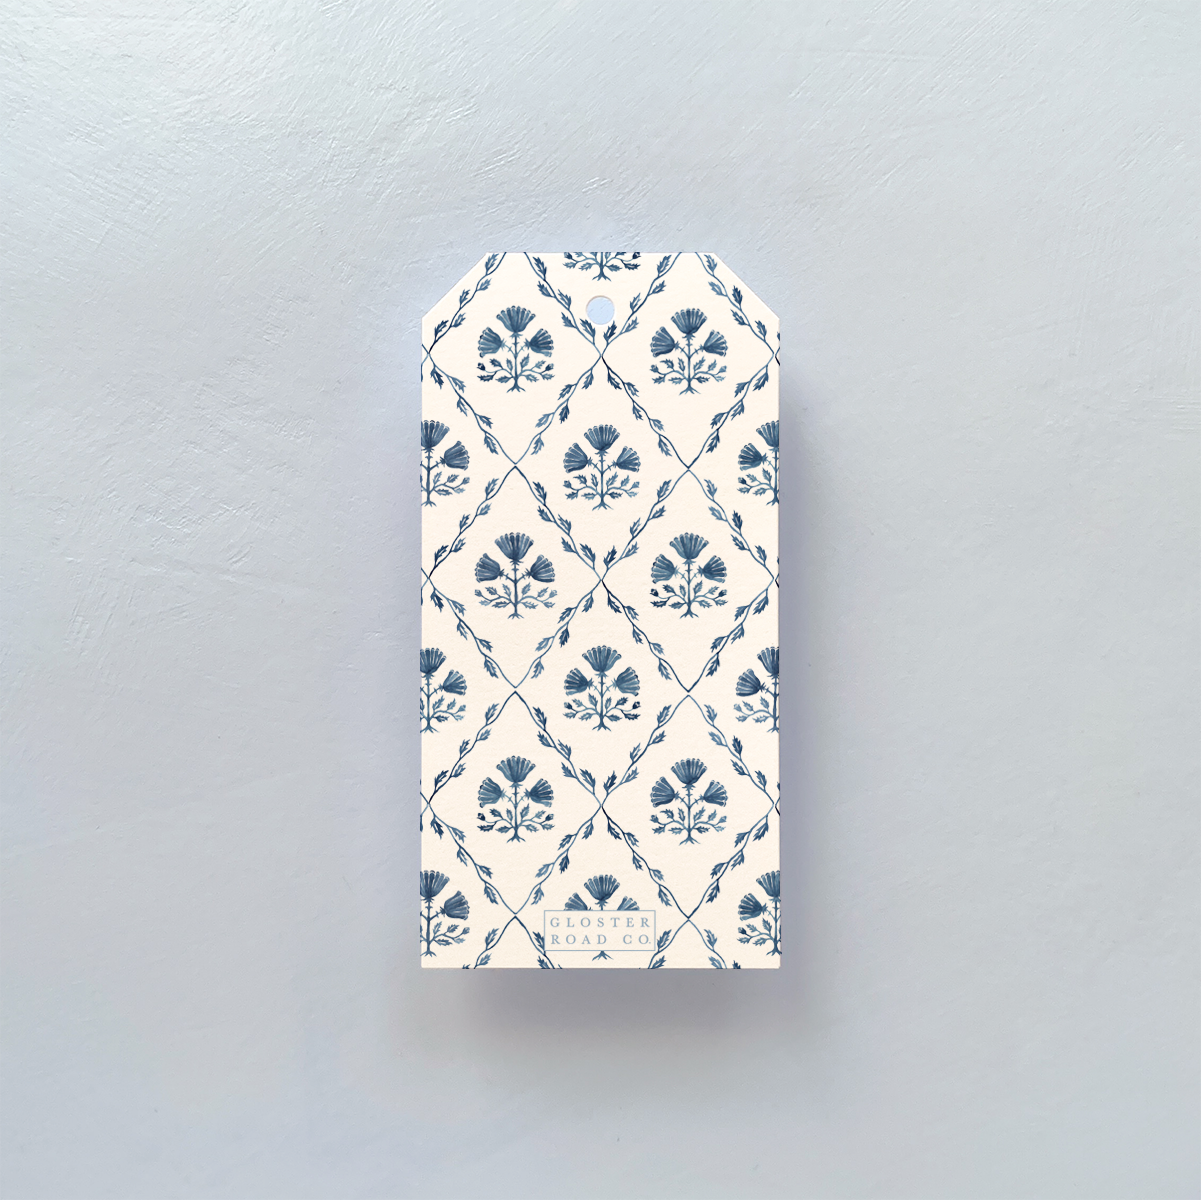 GIFT TAG WITH BLUE AND WHITE DESIGN